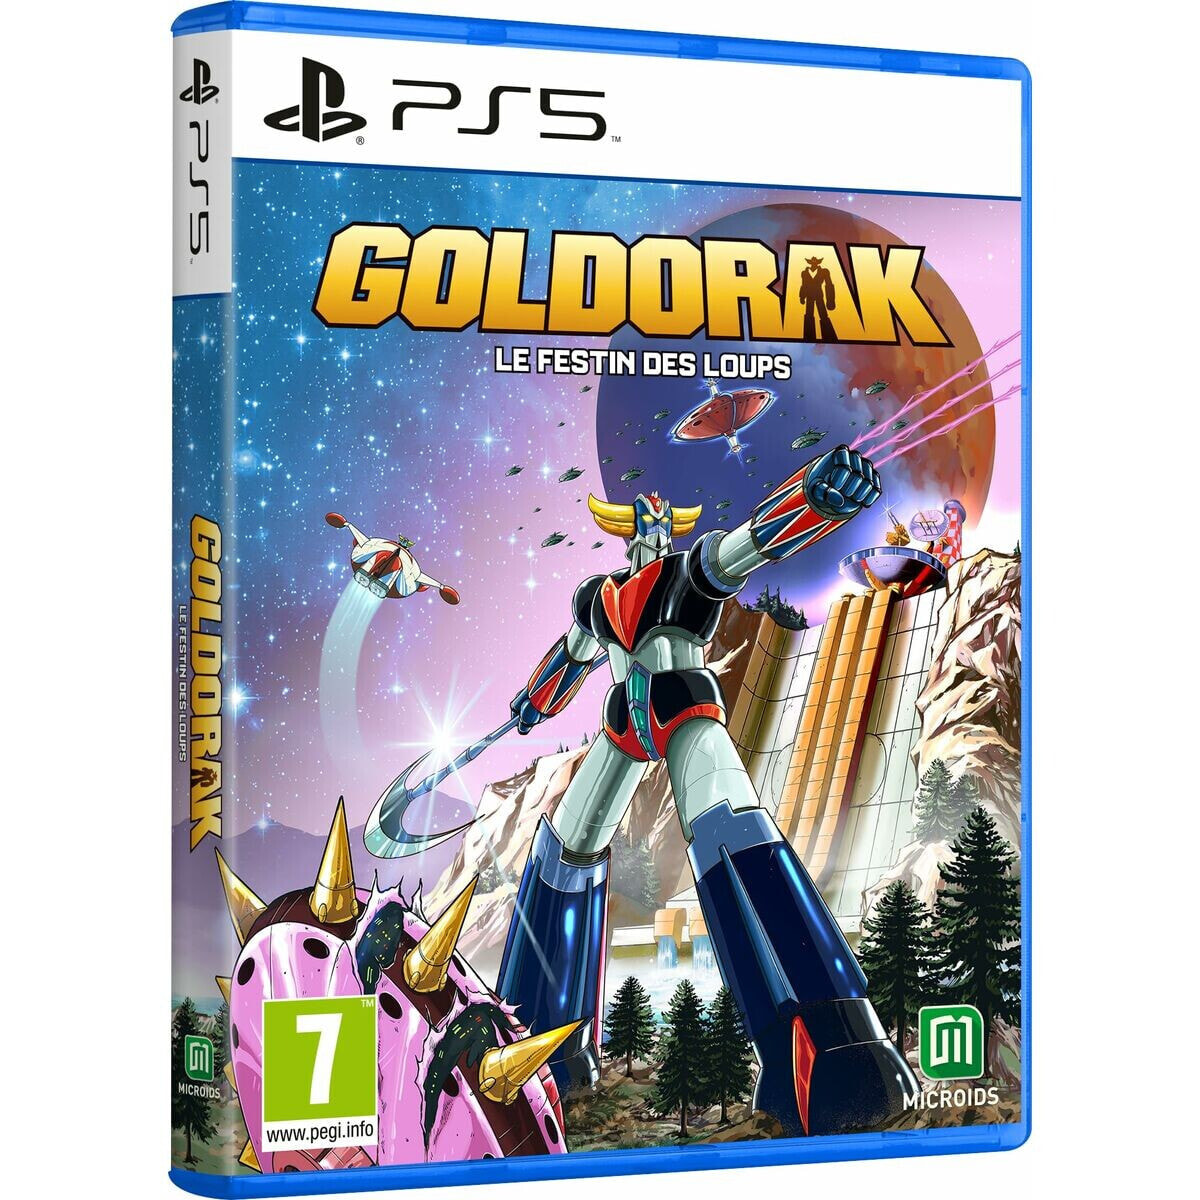 PlayStation 5 Video Game Microids Goldorak Grendizer: The Feast of the Wolves - Standard Edition (FR)